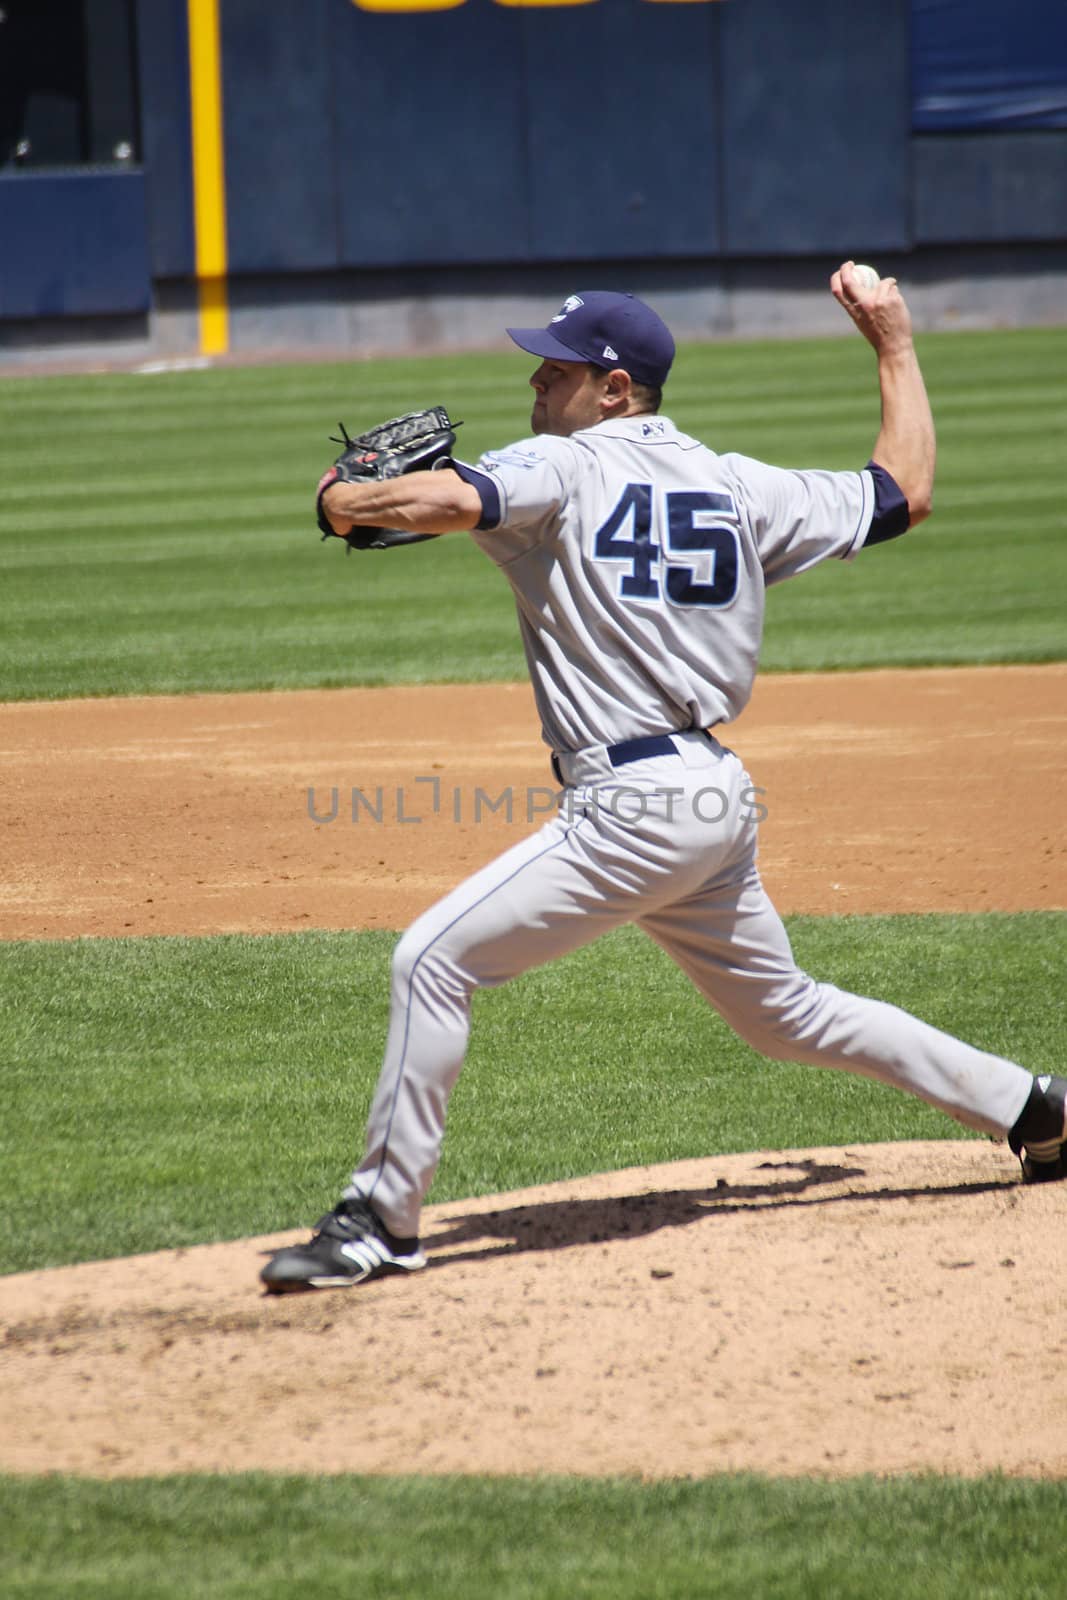 SCRANTON - MAY 13: The Columbus Clippers pitcher Frank Hermann fires a pitch in a game against Scranton Wilkes Barre Yankees in a game at PNC Field May 13, 2010 in Scranton, PA